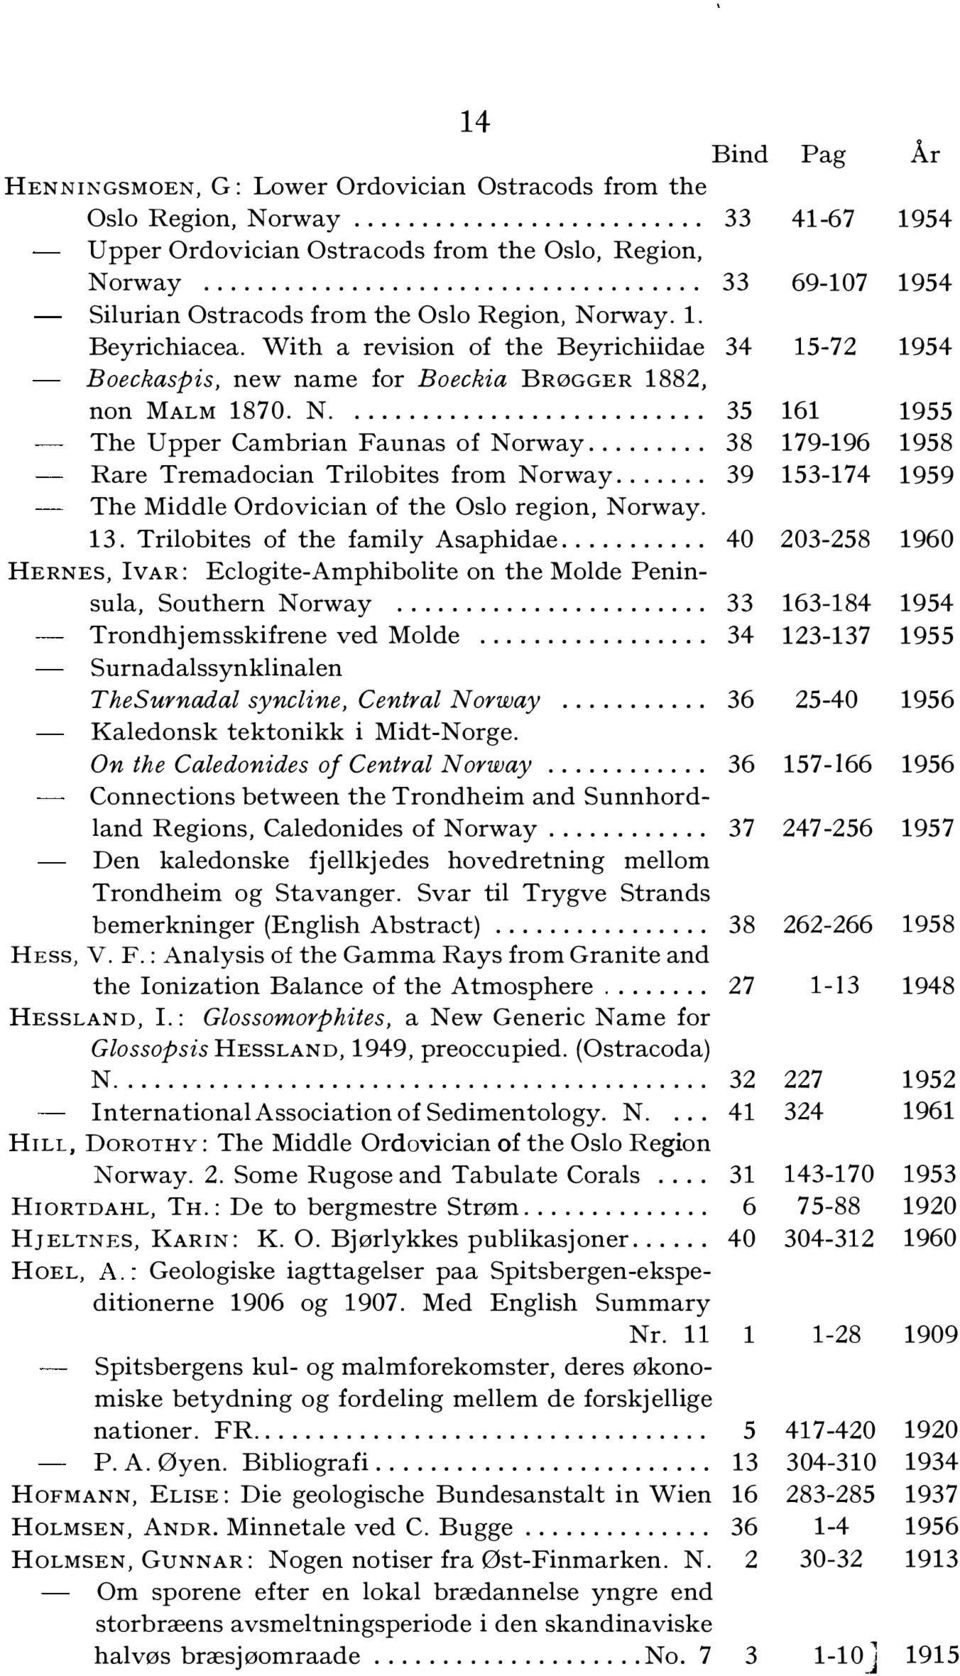 .. 38 Rare Tremadocian Trilobites from Norway... 39 The Middle Ordovician of the Oslo region, Norway. 41-67 69-107 15-72 161 179-196 153-174 1954 1954 1954 1958 1959 13.